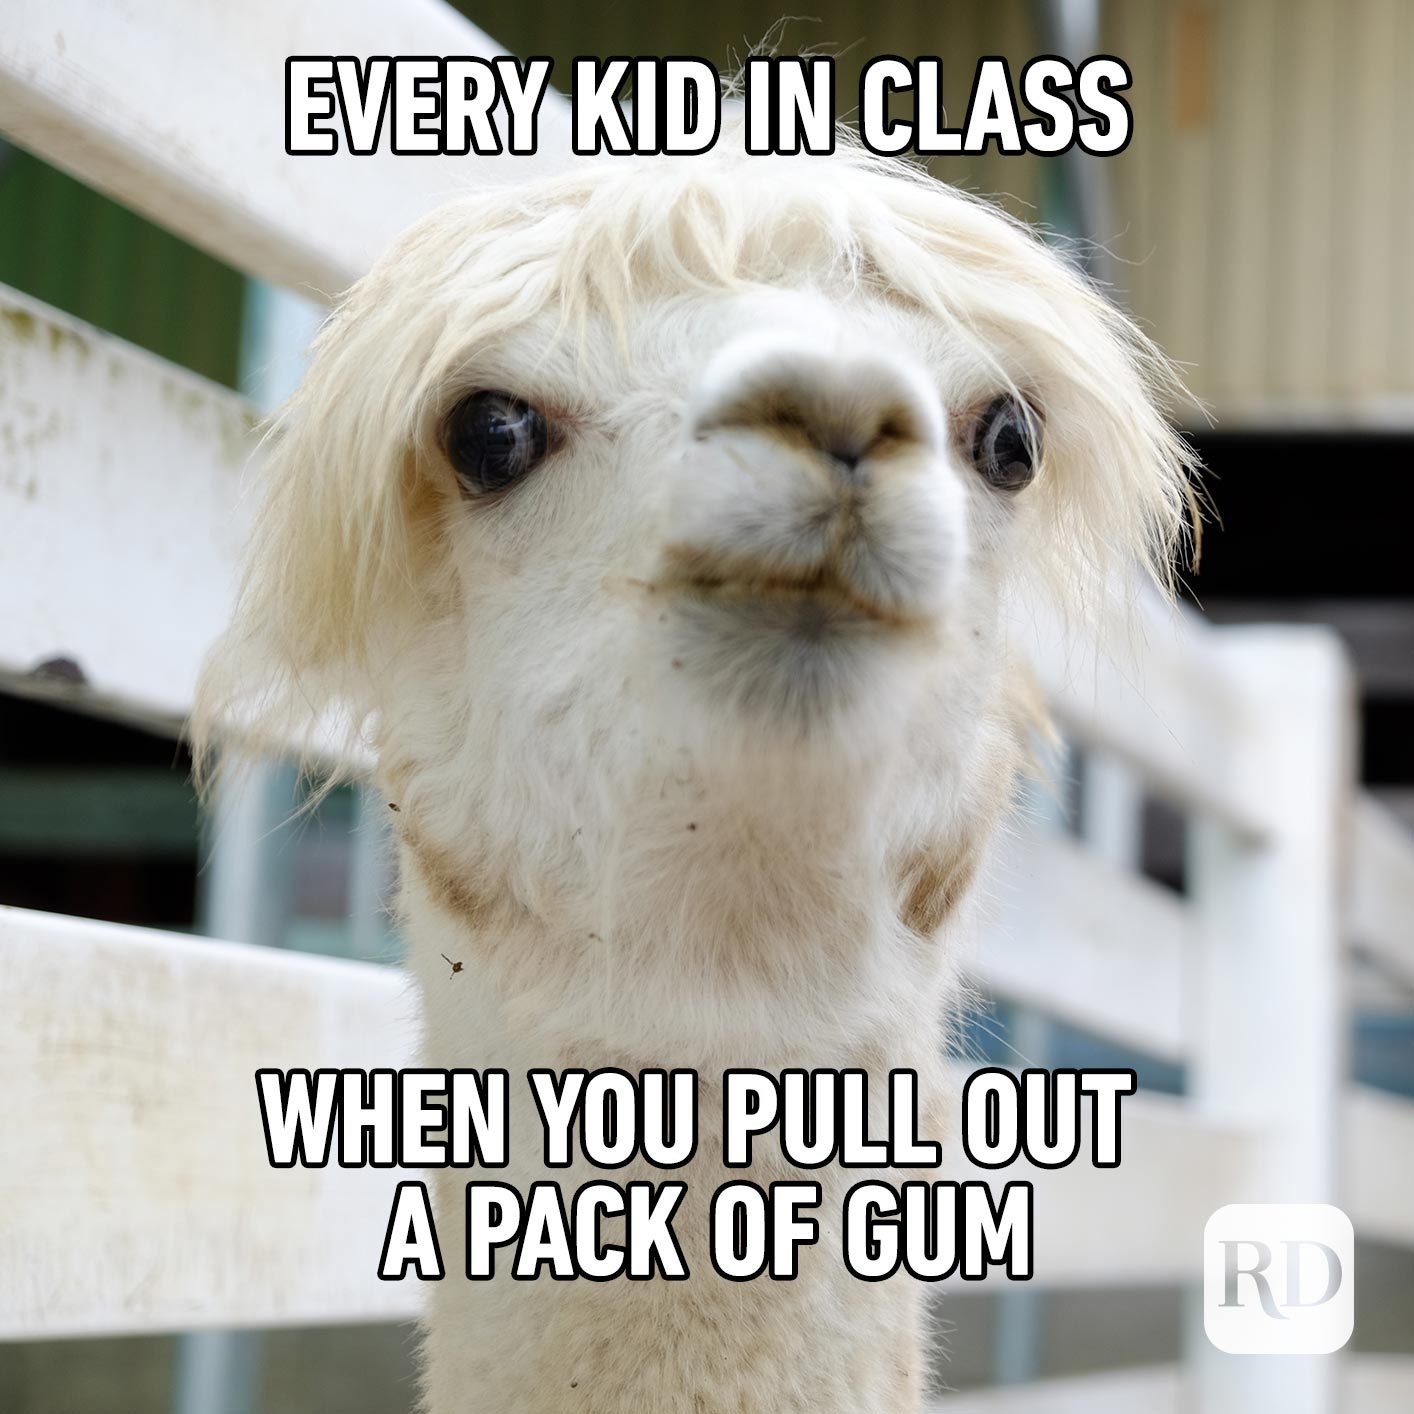 Alpaca peeking its head up. Meme text: Every kid in class when you pull out a pack of gum